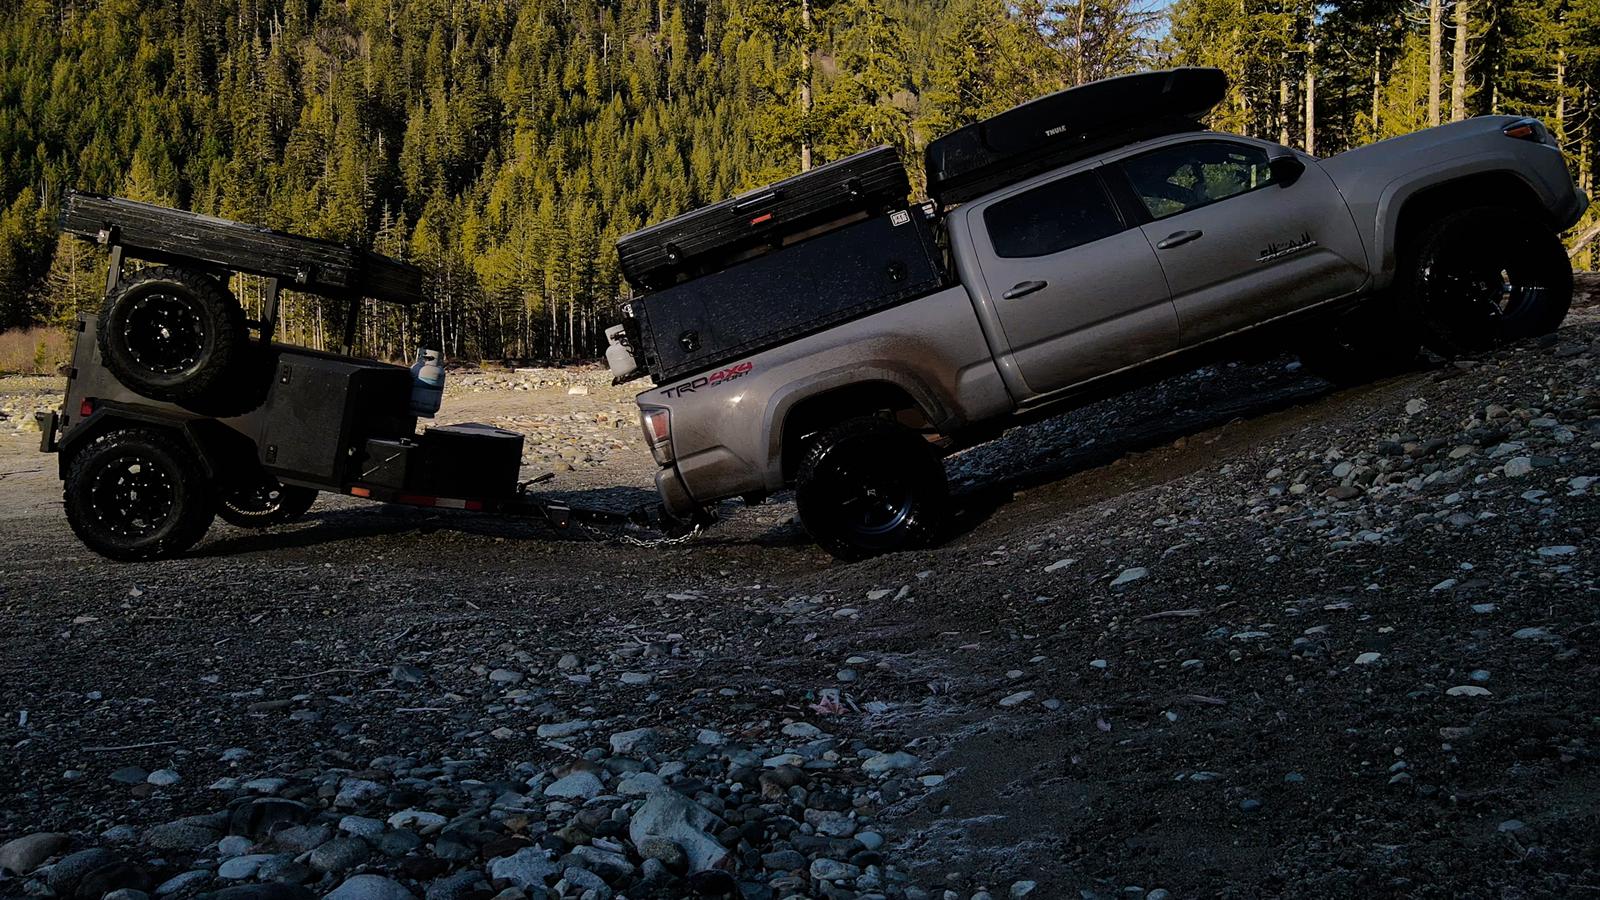 Take your overlanding to the next level